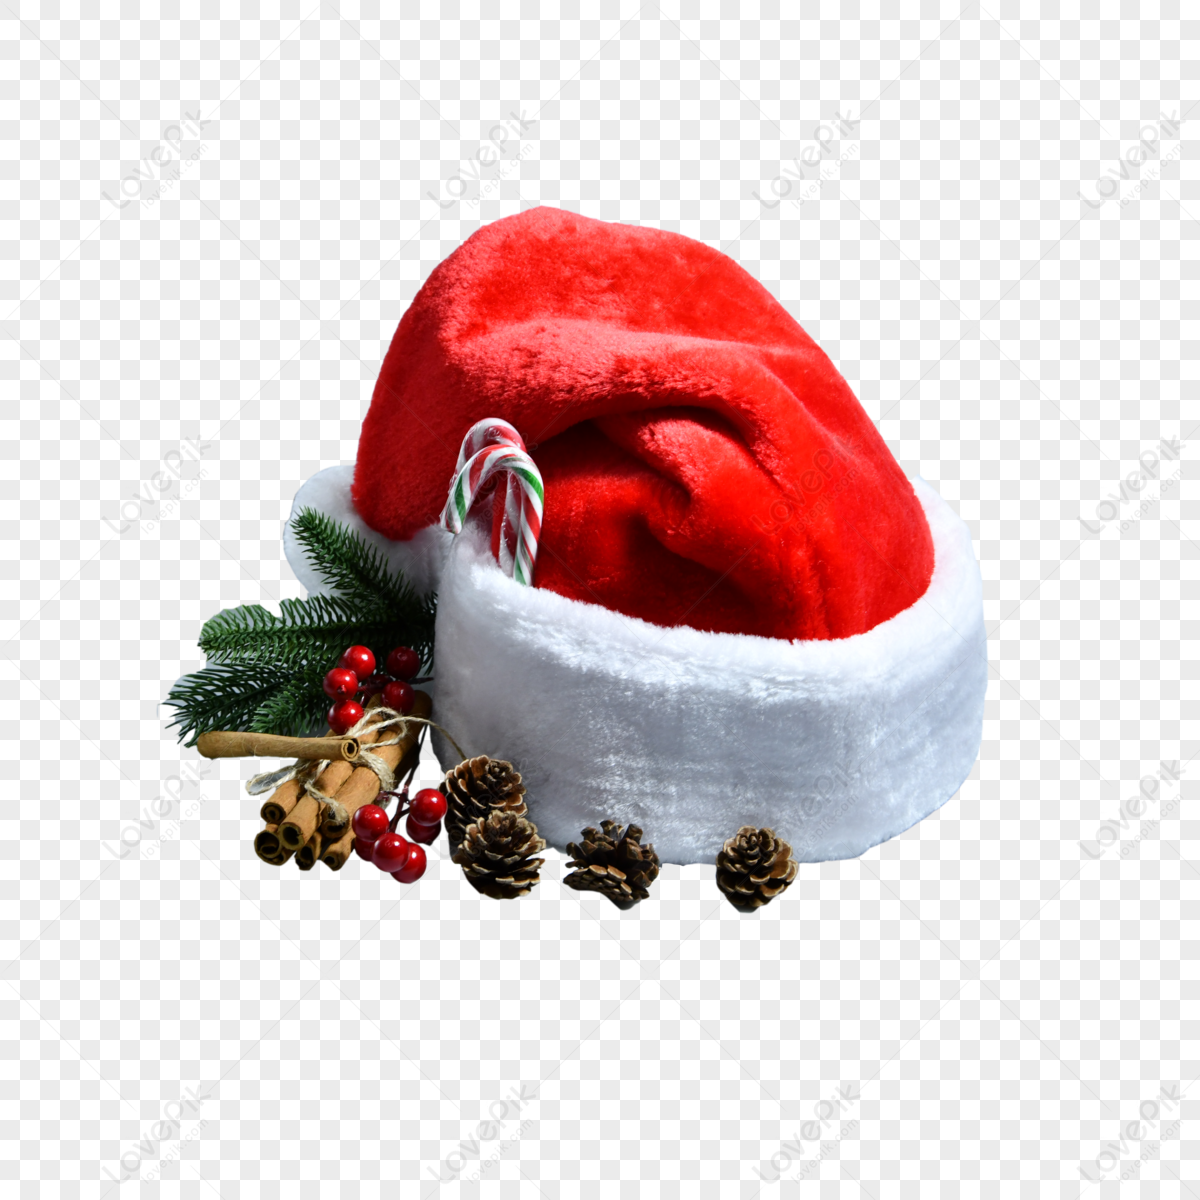 Santa Claus Hat PNG Images With Transparent Background | Free ...